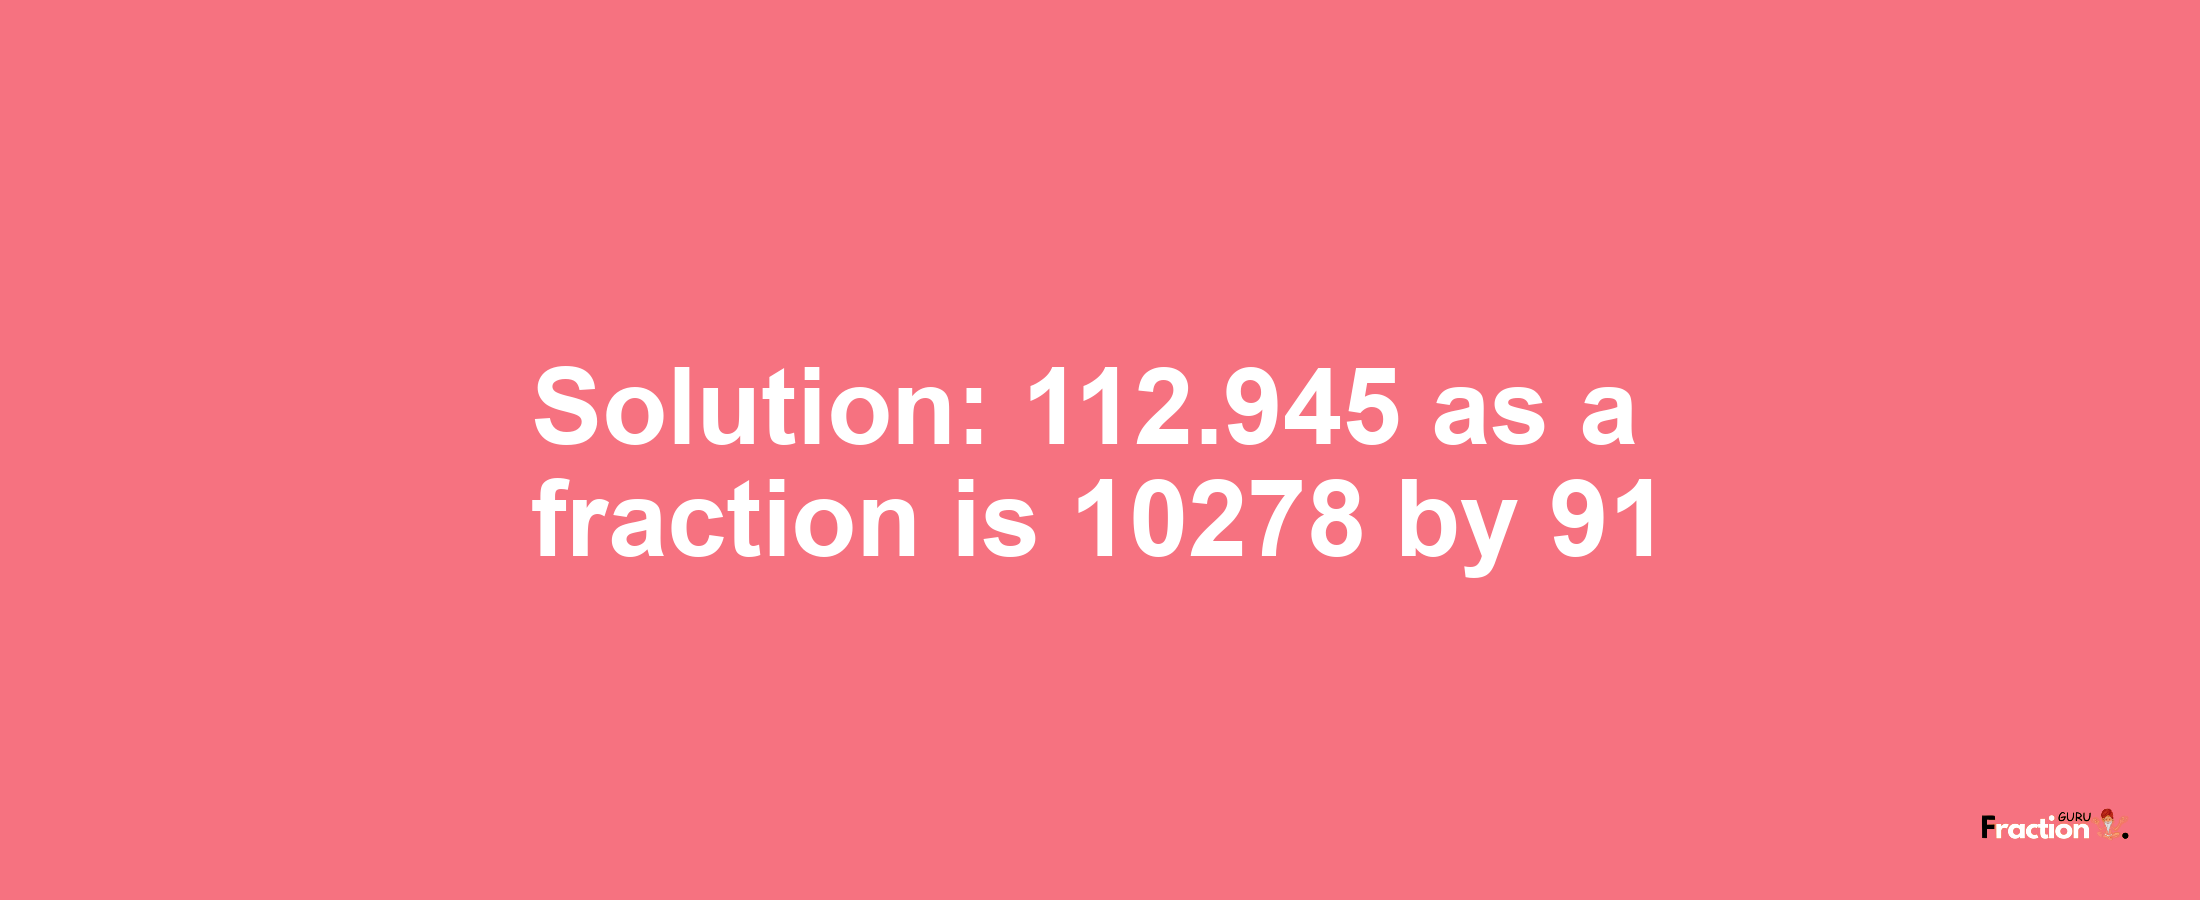 Solution:112.945 as a fraction is 10278/91